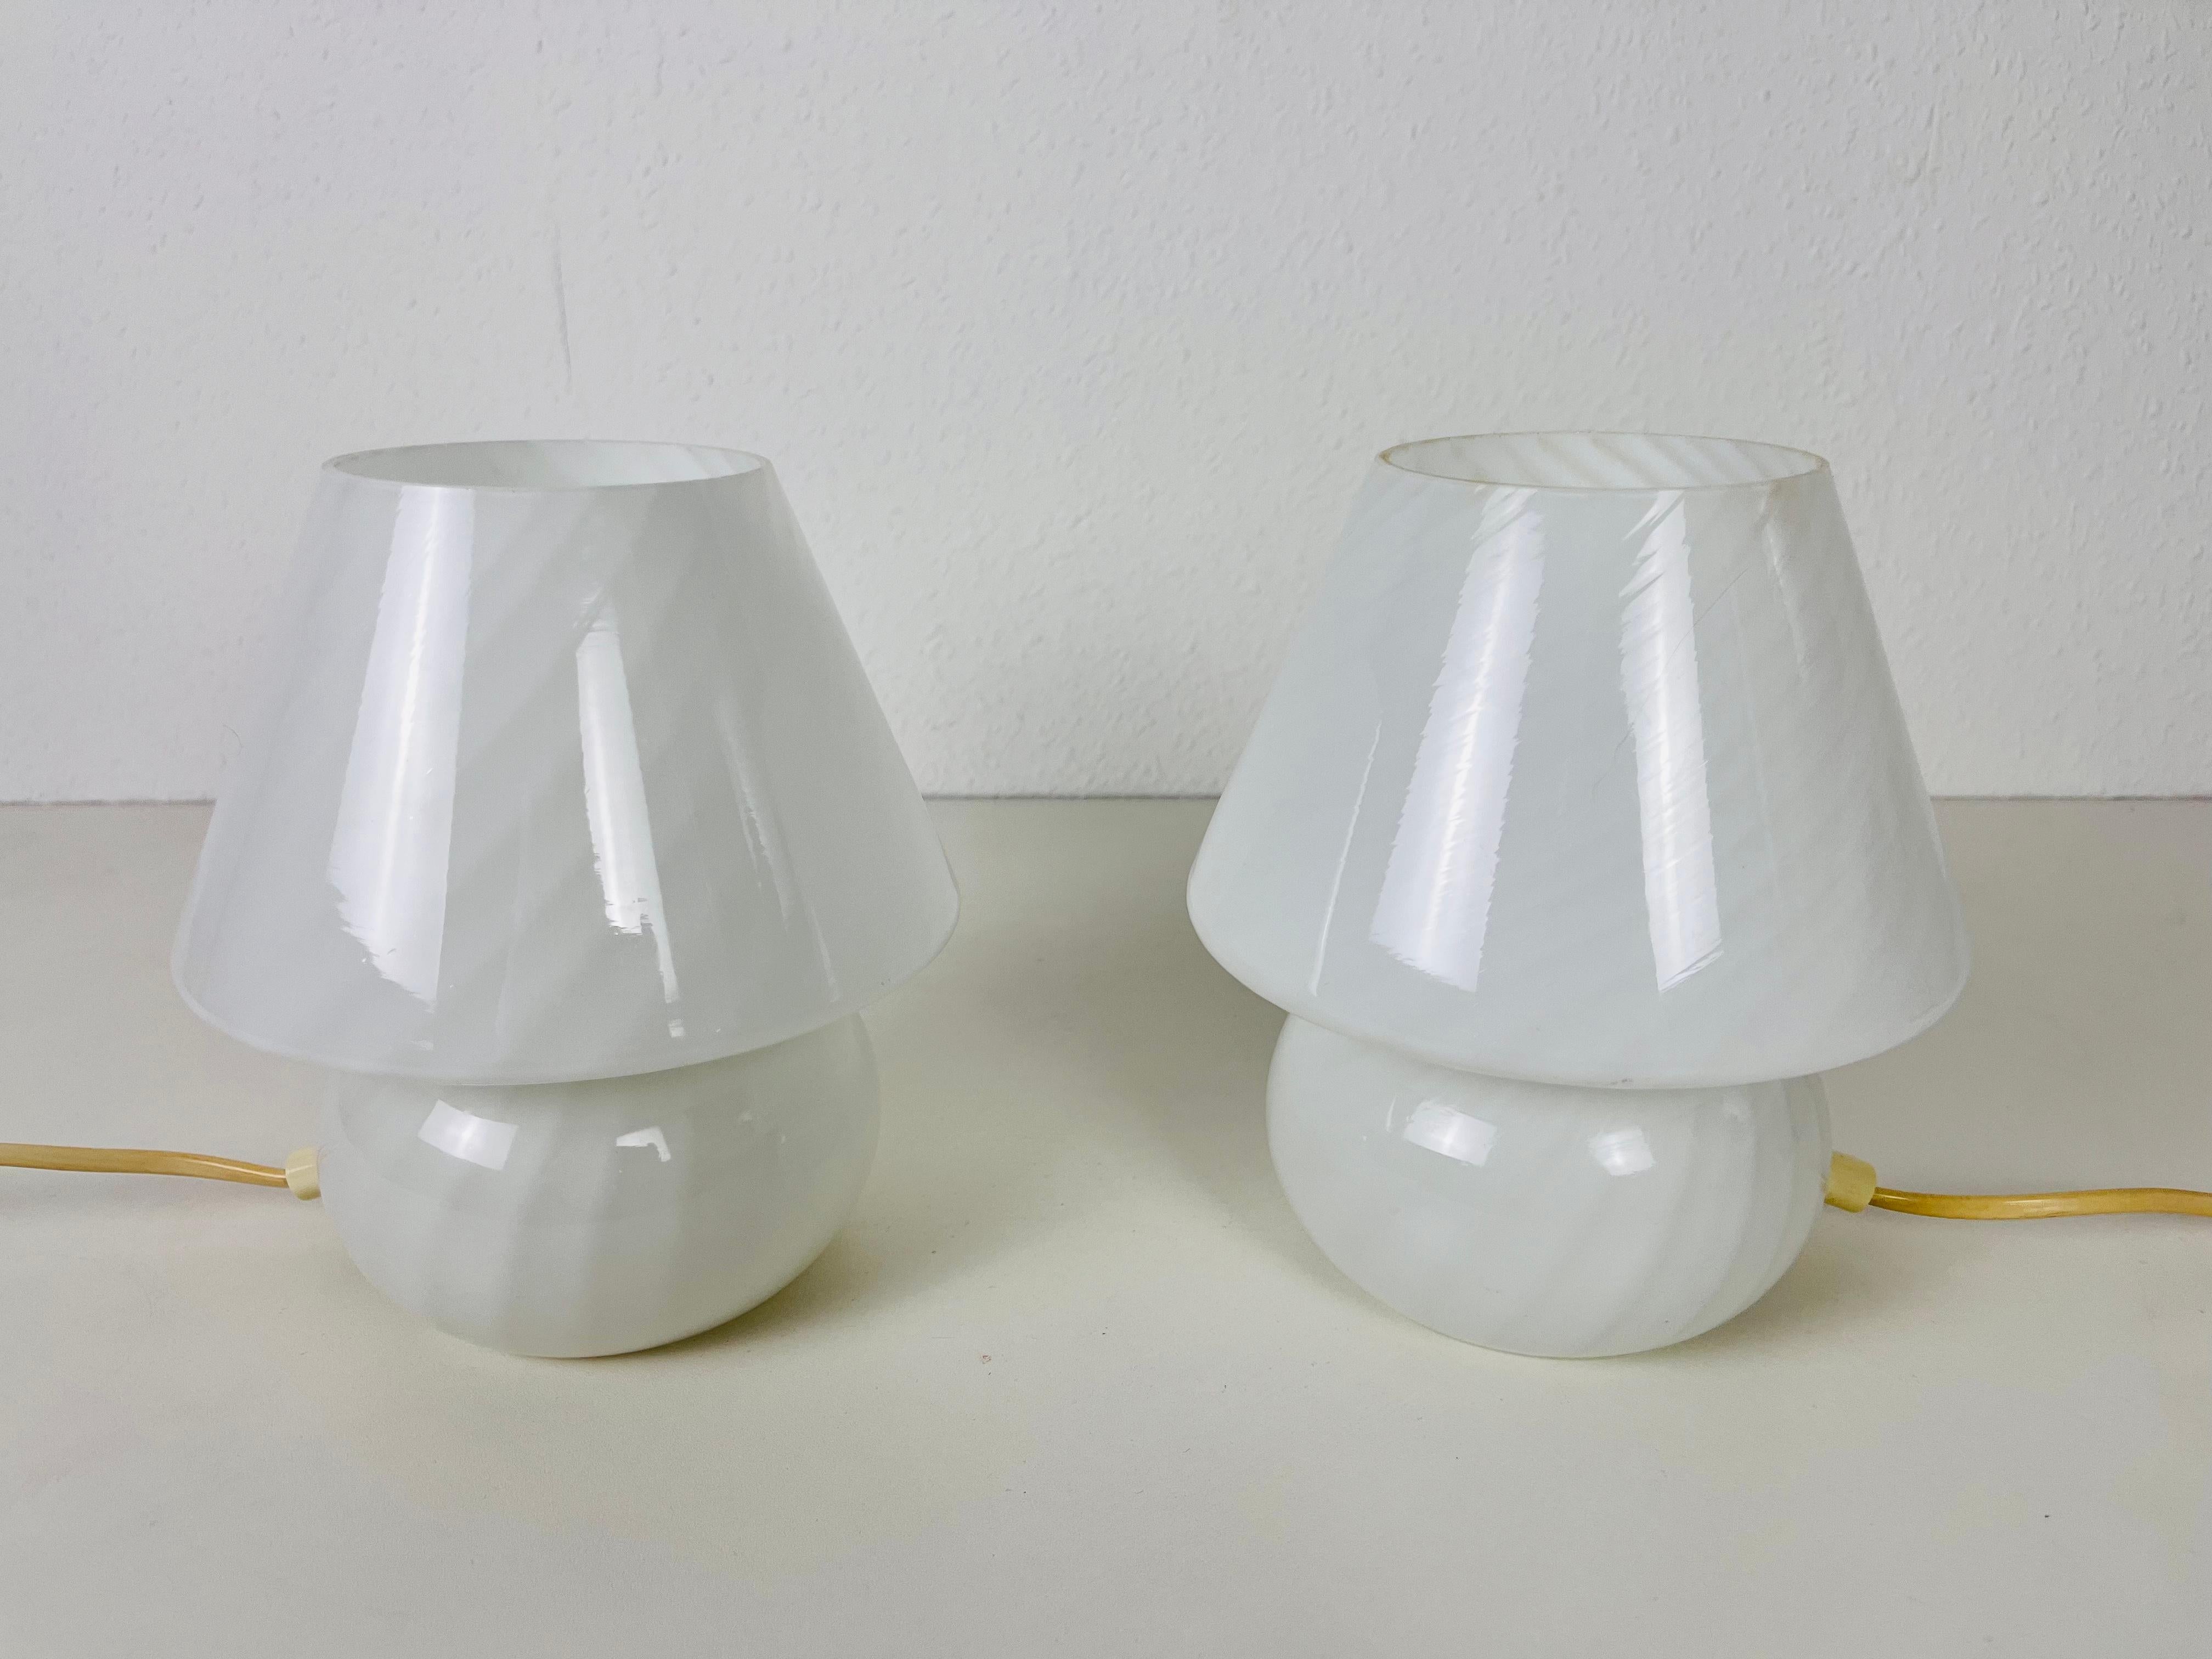 Pair of Vetri D‘Arte Murano Glass Mushroom Table Lamps, Italy, 1970s In Excellent Condition For Sale In Hagenbach, DE